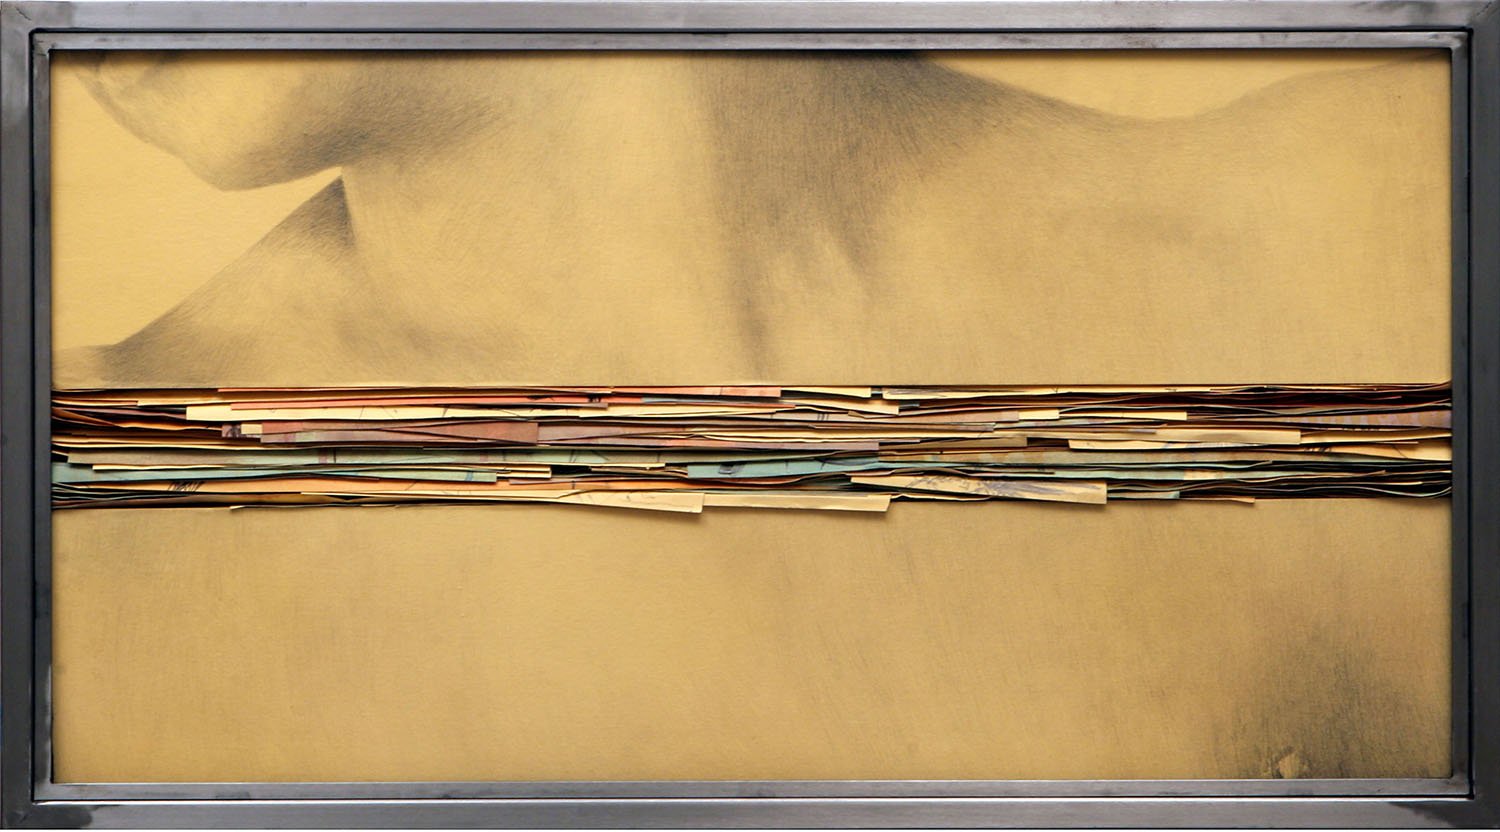 Untitled, 2008, graphite and mixed media on paper on wood, steel, glass, 50 x 90 x 7 cm